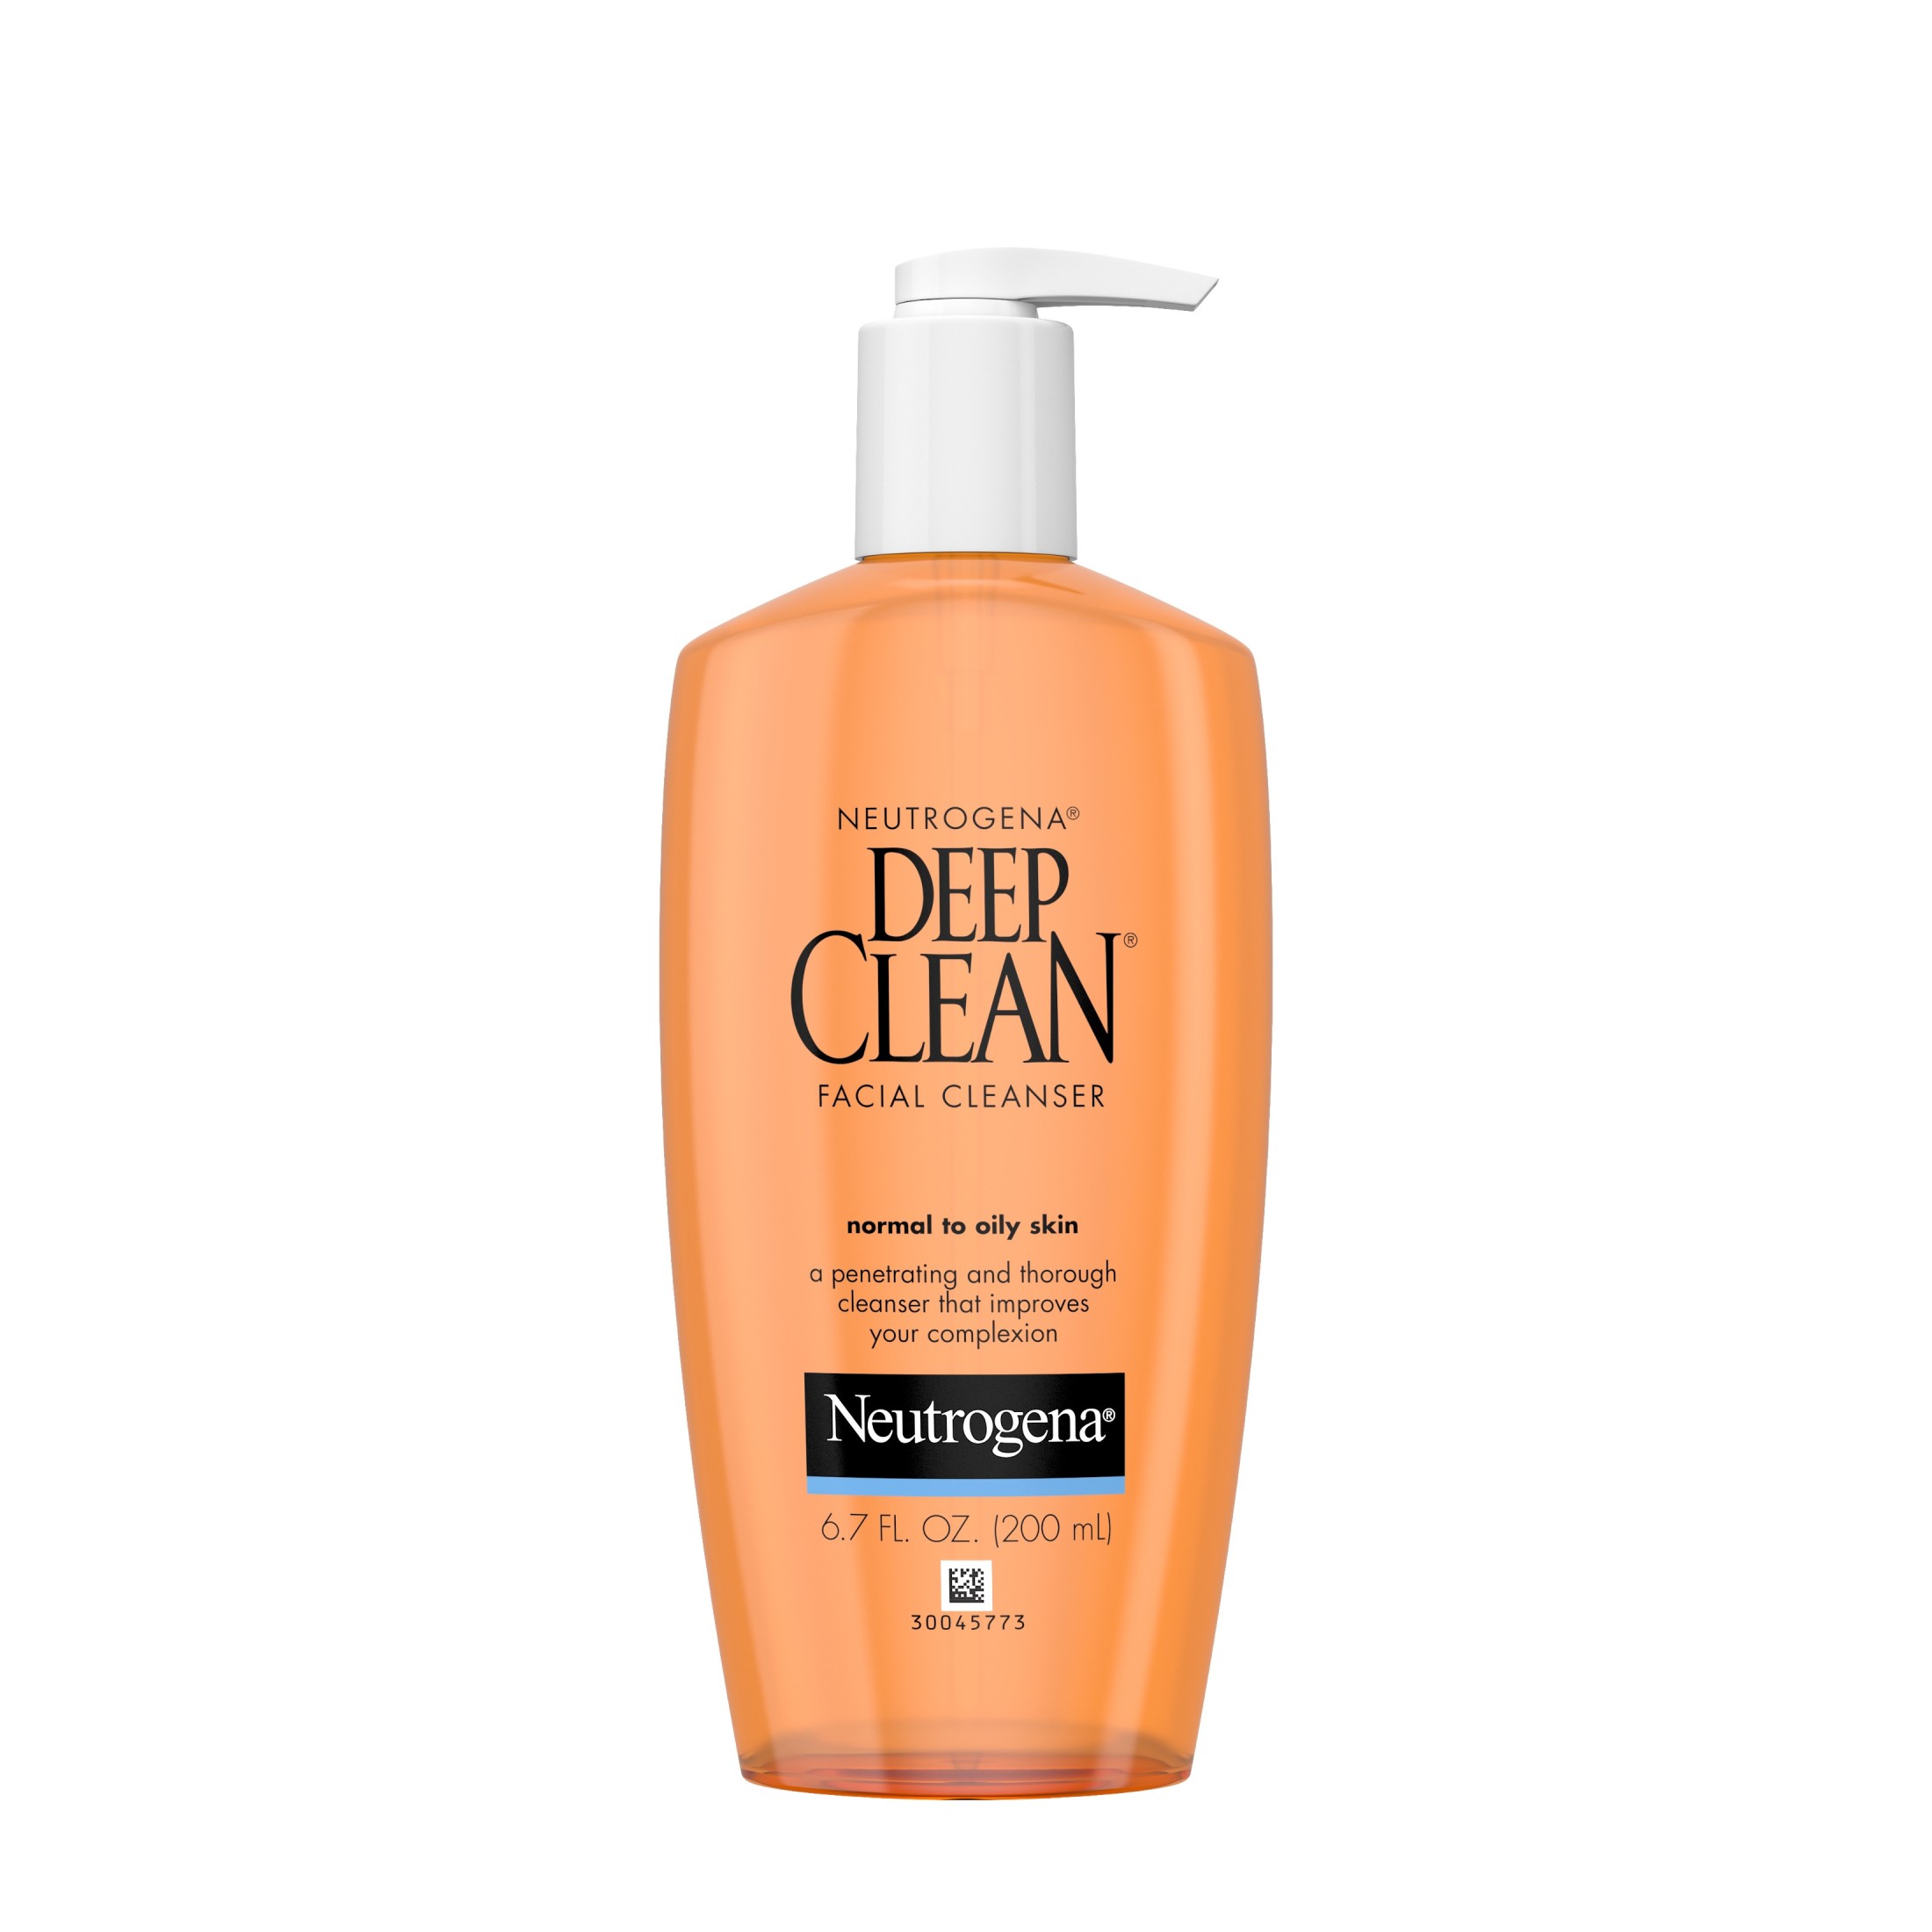 Neutrogena Oil-Free Deep Clean Daily Facial Cleanser, Face Wash, 6.7 fl. oz - image 1 of 12